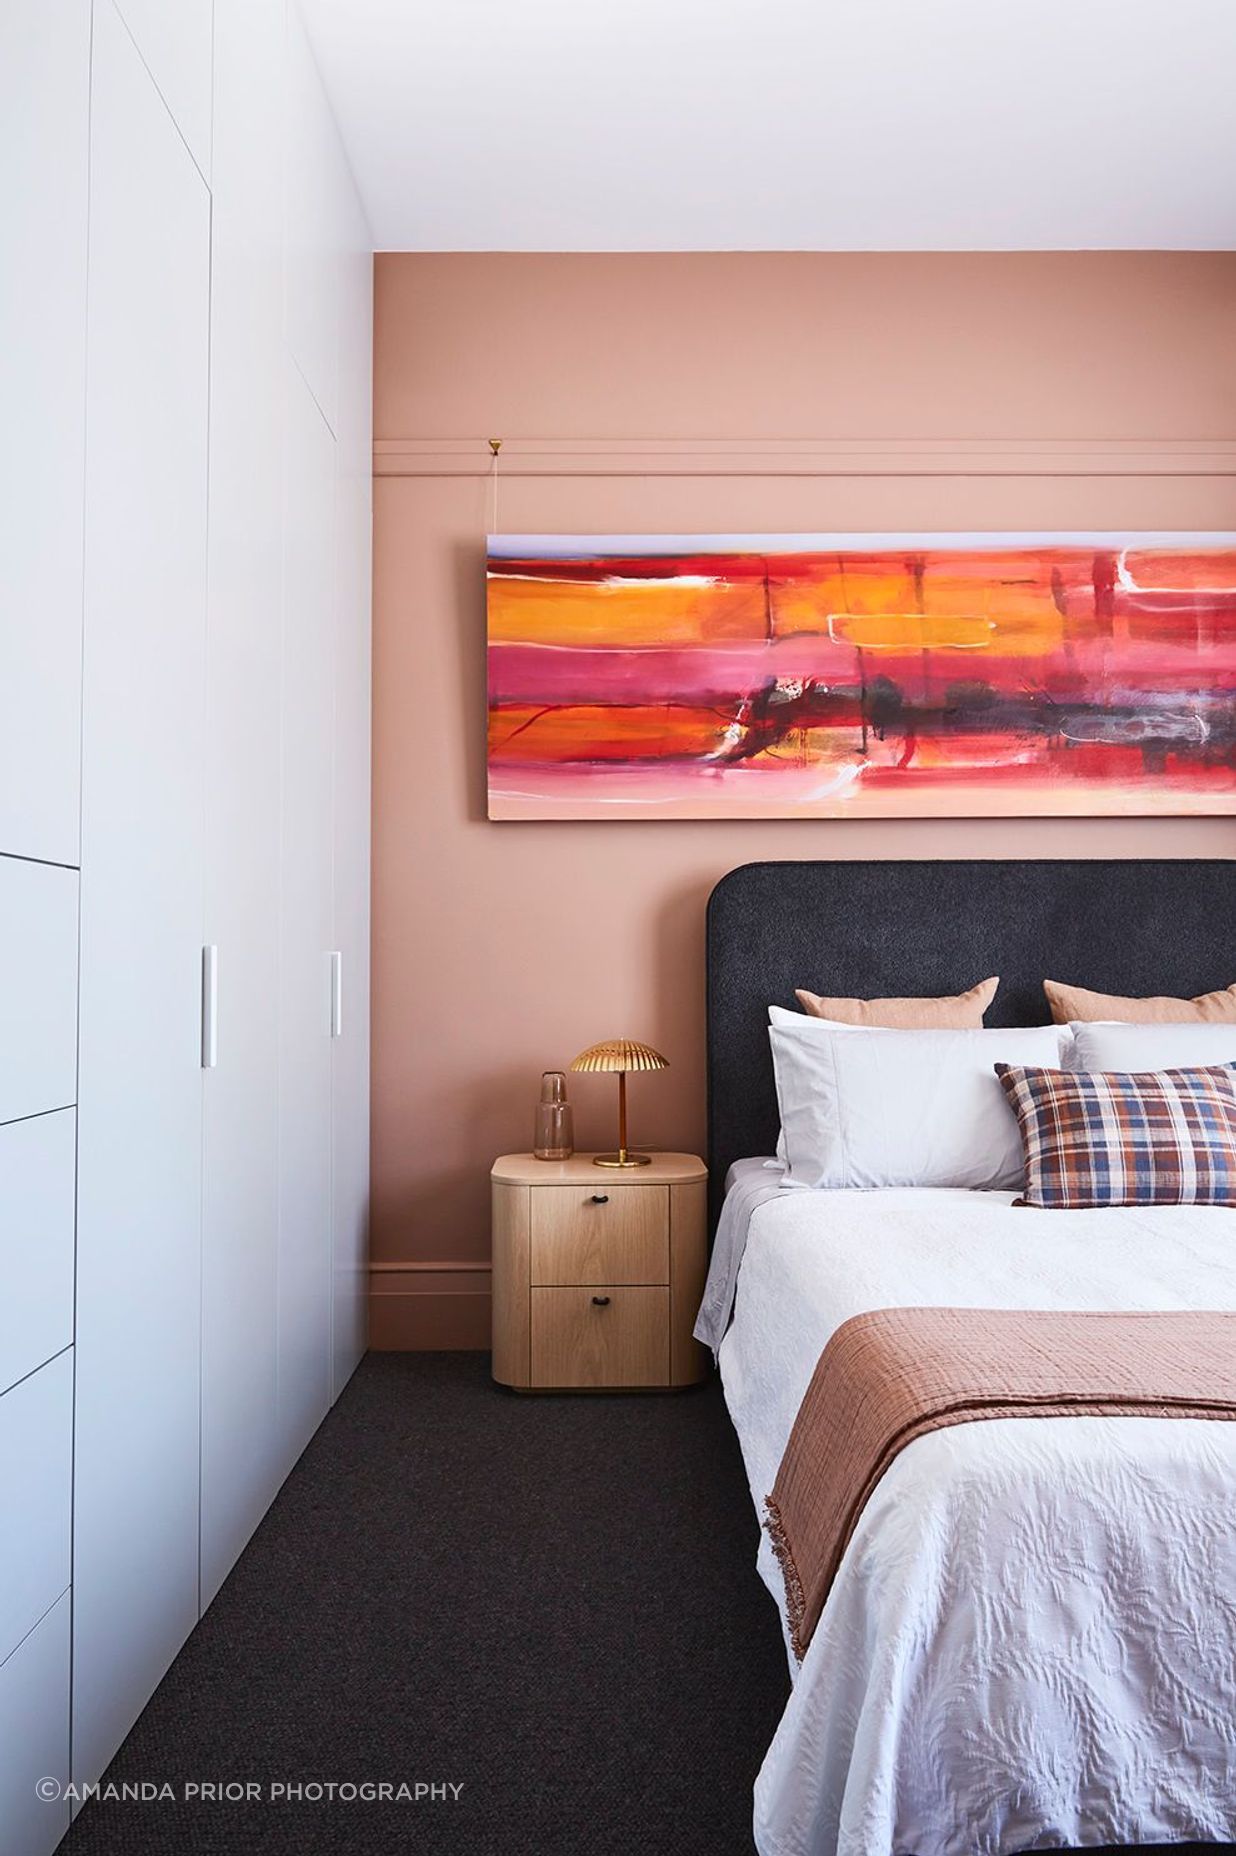 In a bedroom, a pop of pink uplifts and integrates the artwork